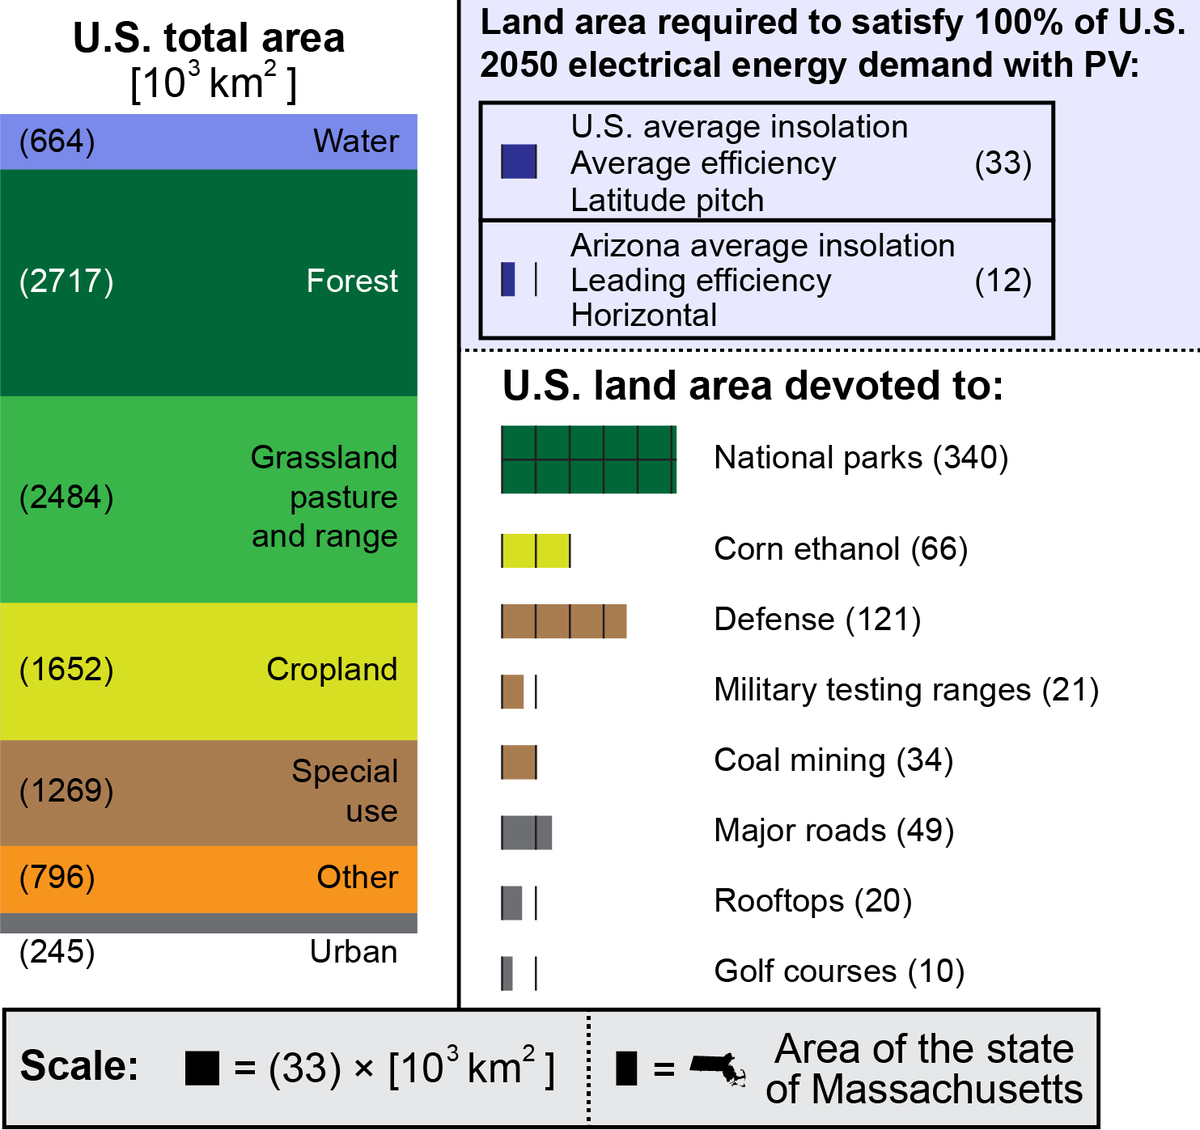 Sunlight isn’t energy dense, so you need lots of land… but less than most think. We could power the US entirely with PV in the area used for coal mines OR missile testing ranges + golf courses OR 50% of corn ethanol production. (Not saying 100% solar is the goal.) [ @mitenergy]